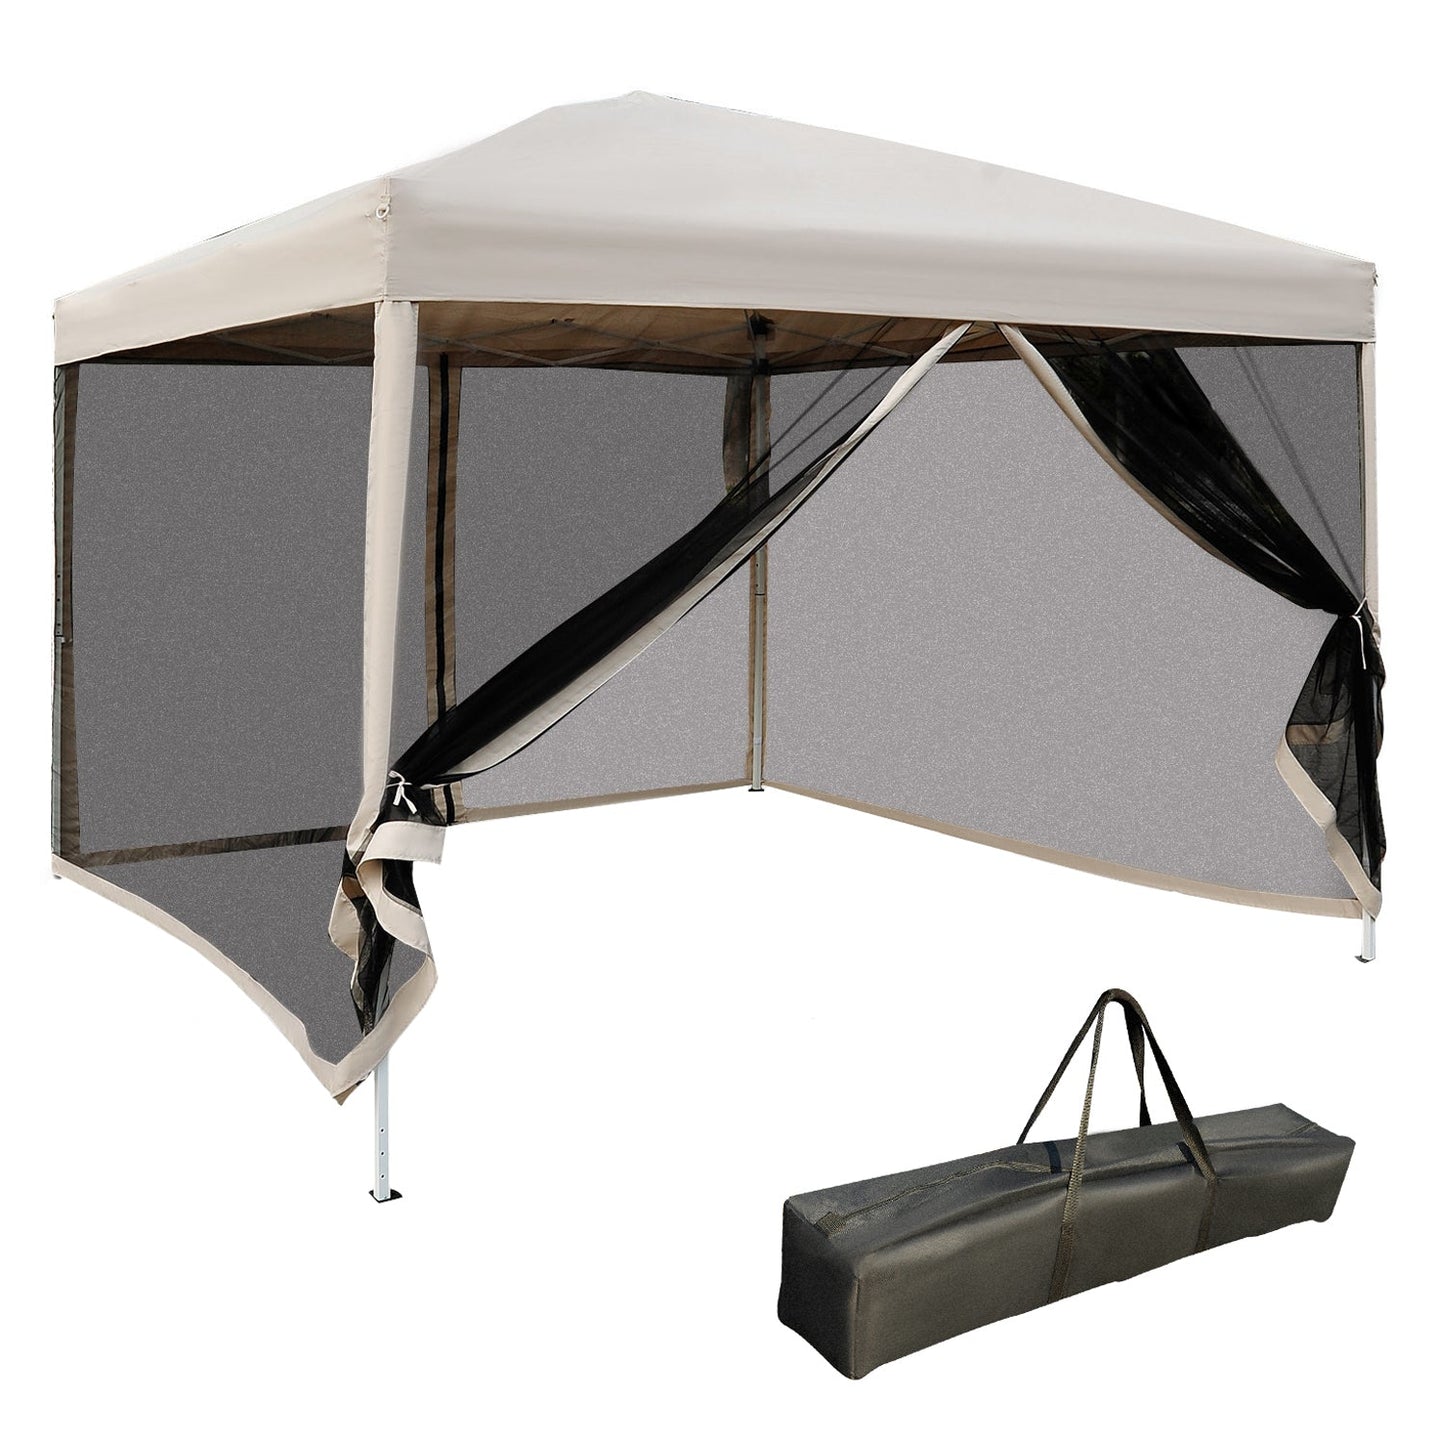 Outdoor and Garden-10' x 10' Pop Up Canopy Tent with Breathable Mesh Sidewalls, Easy Height Adjustable, Easy Transport Carrying Bag for Backyard Garden Patio - Outdoor Style Company